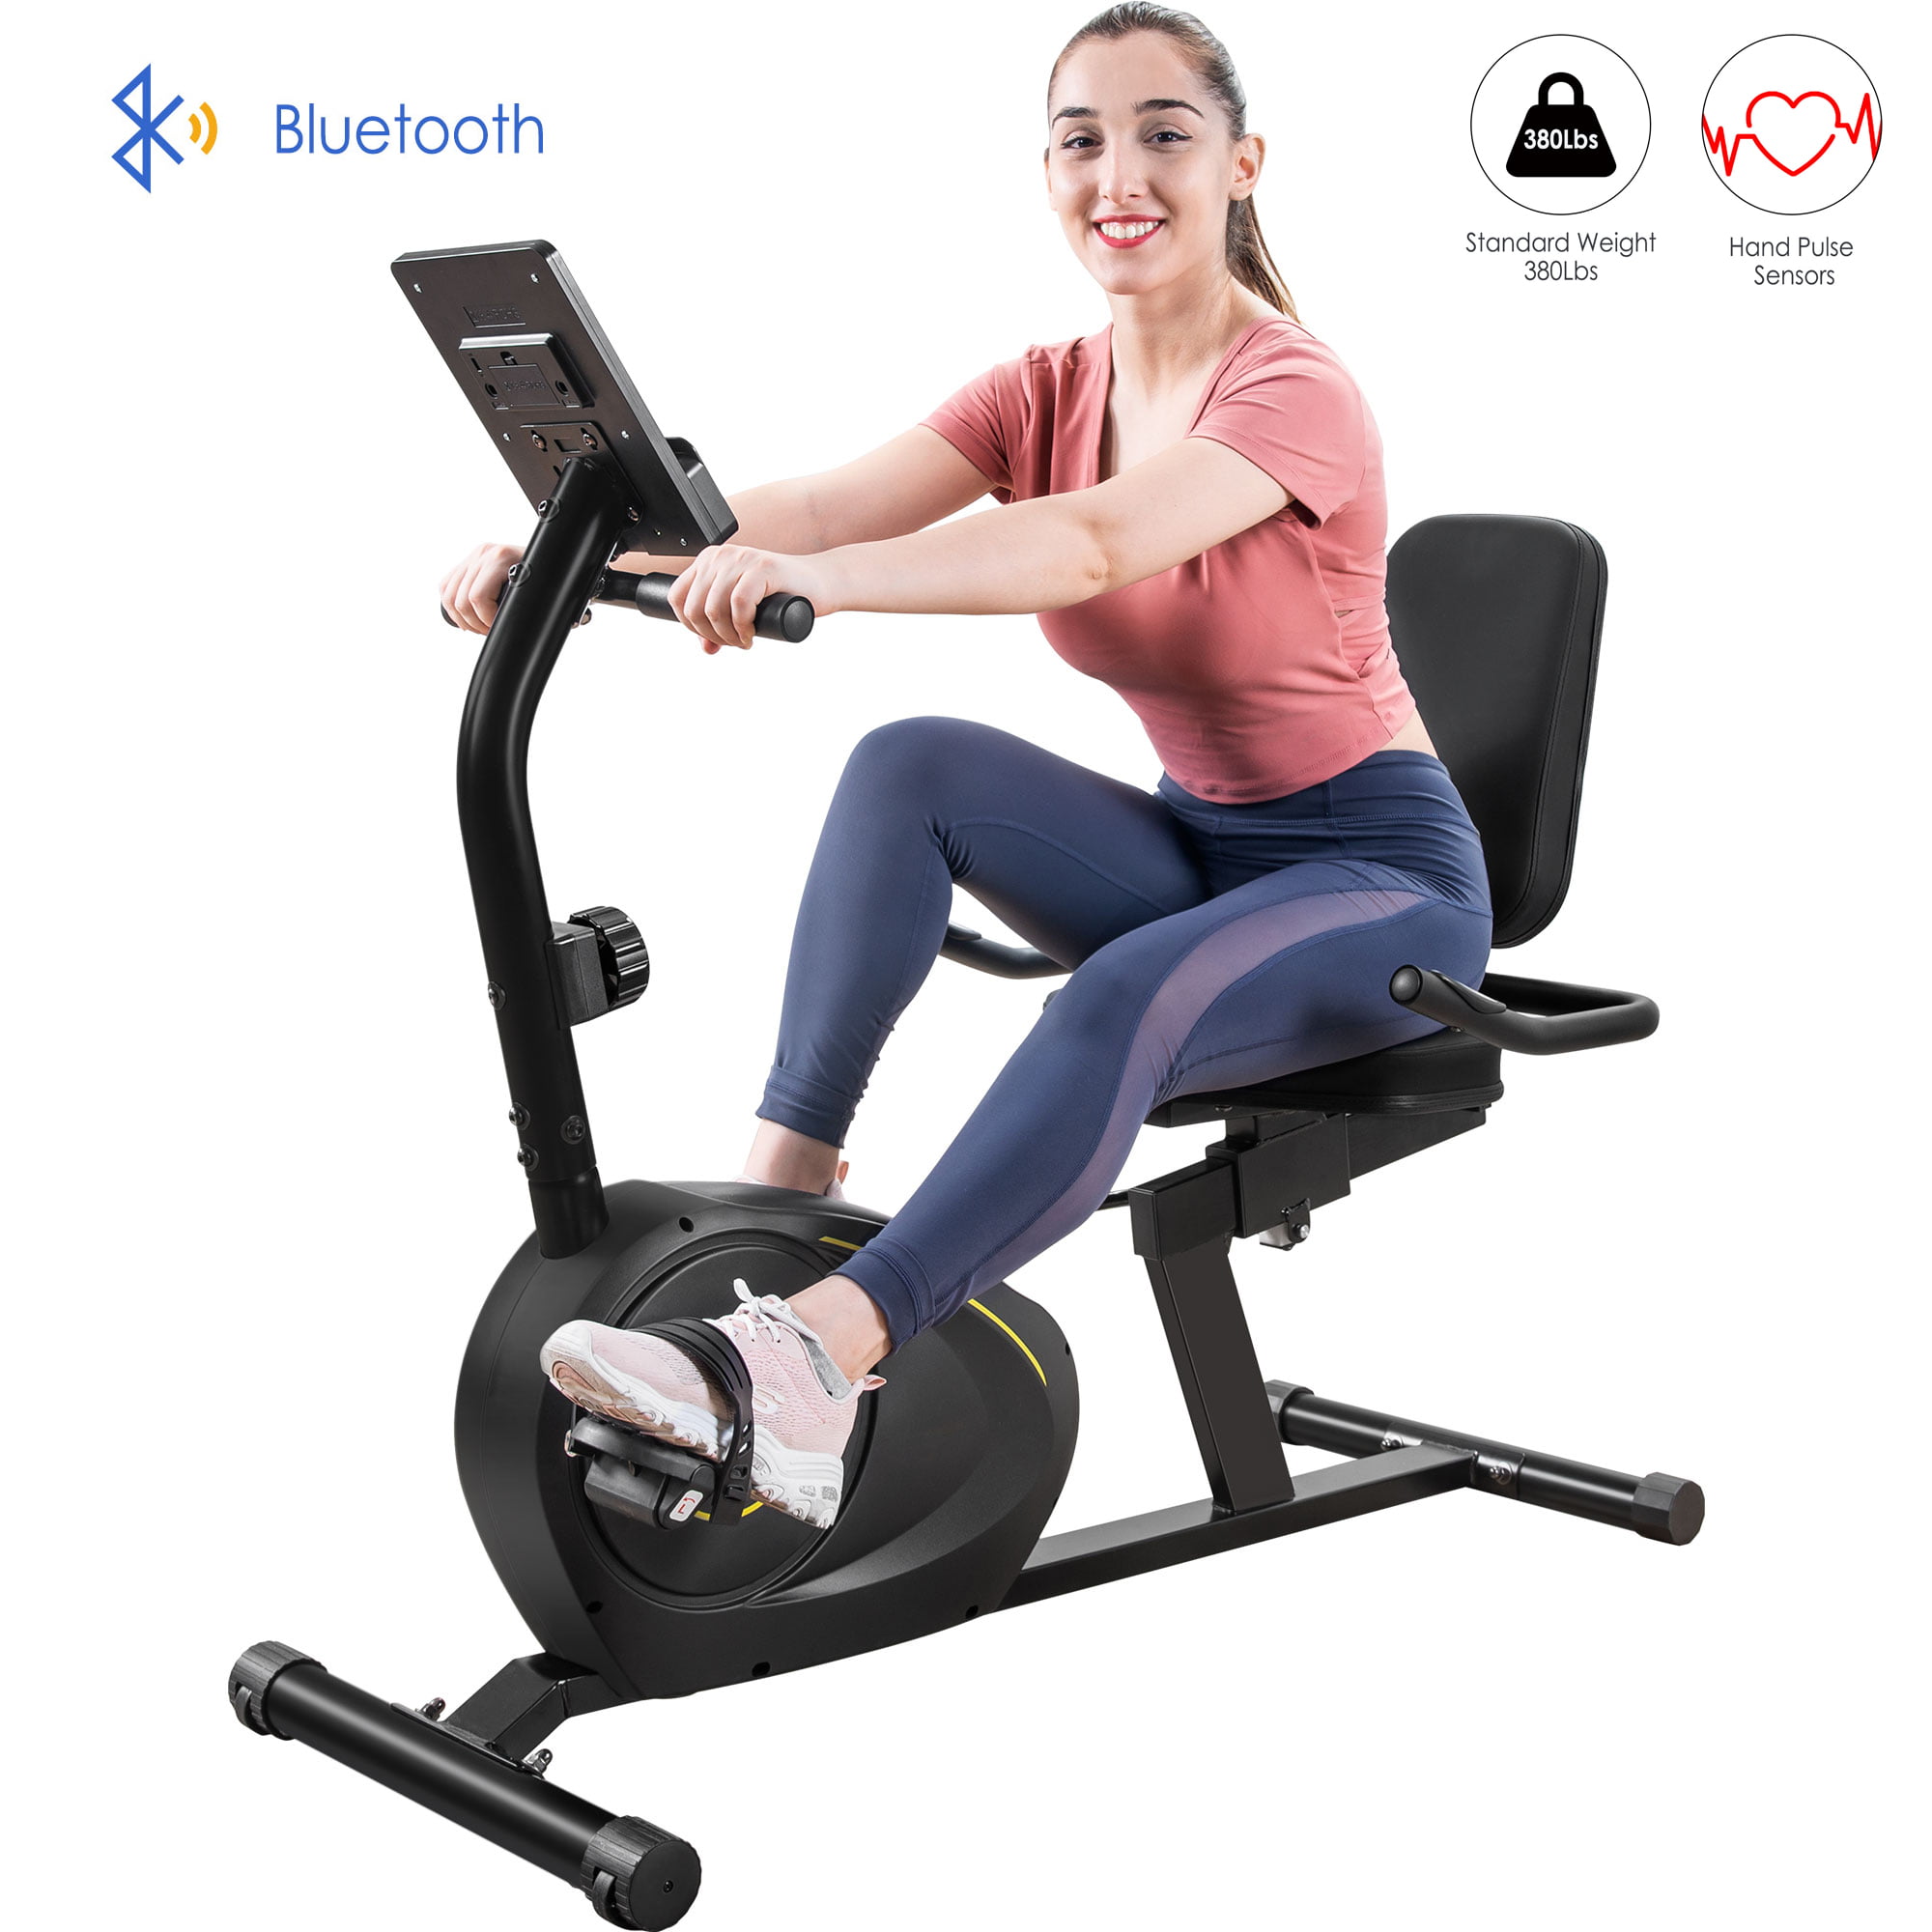 Stationary Sit Down Bicycle Indoor Cycling Trainer Recumbent Exercise Bike 